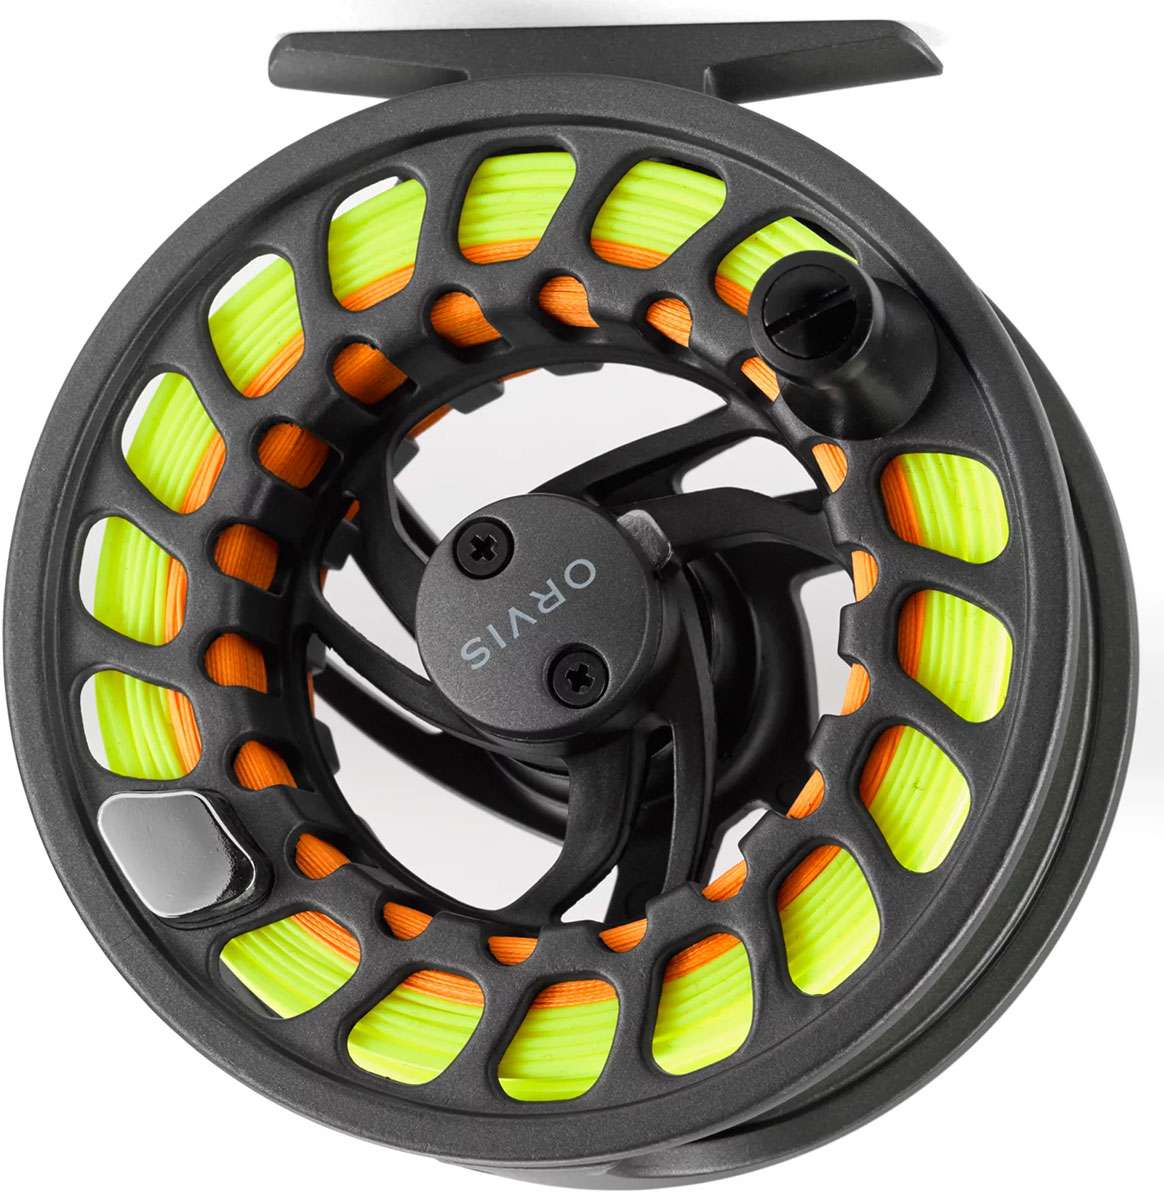 https://i.tackledirect.com/images/inset1/orvis-clearwater-large-arbor-fly-reel-ii-4-6-wt.jpg